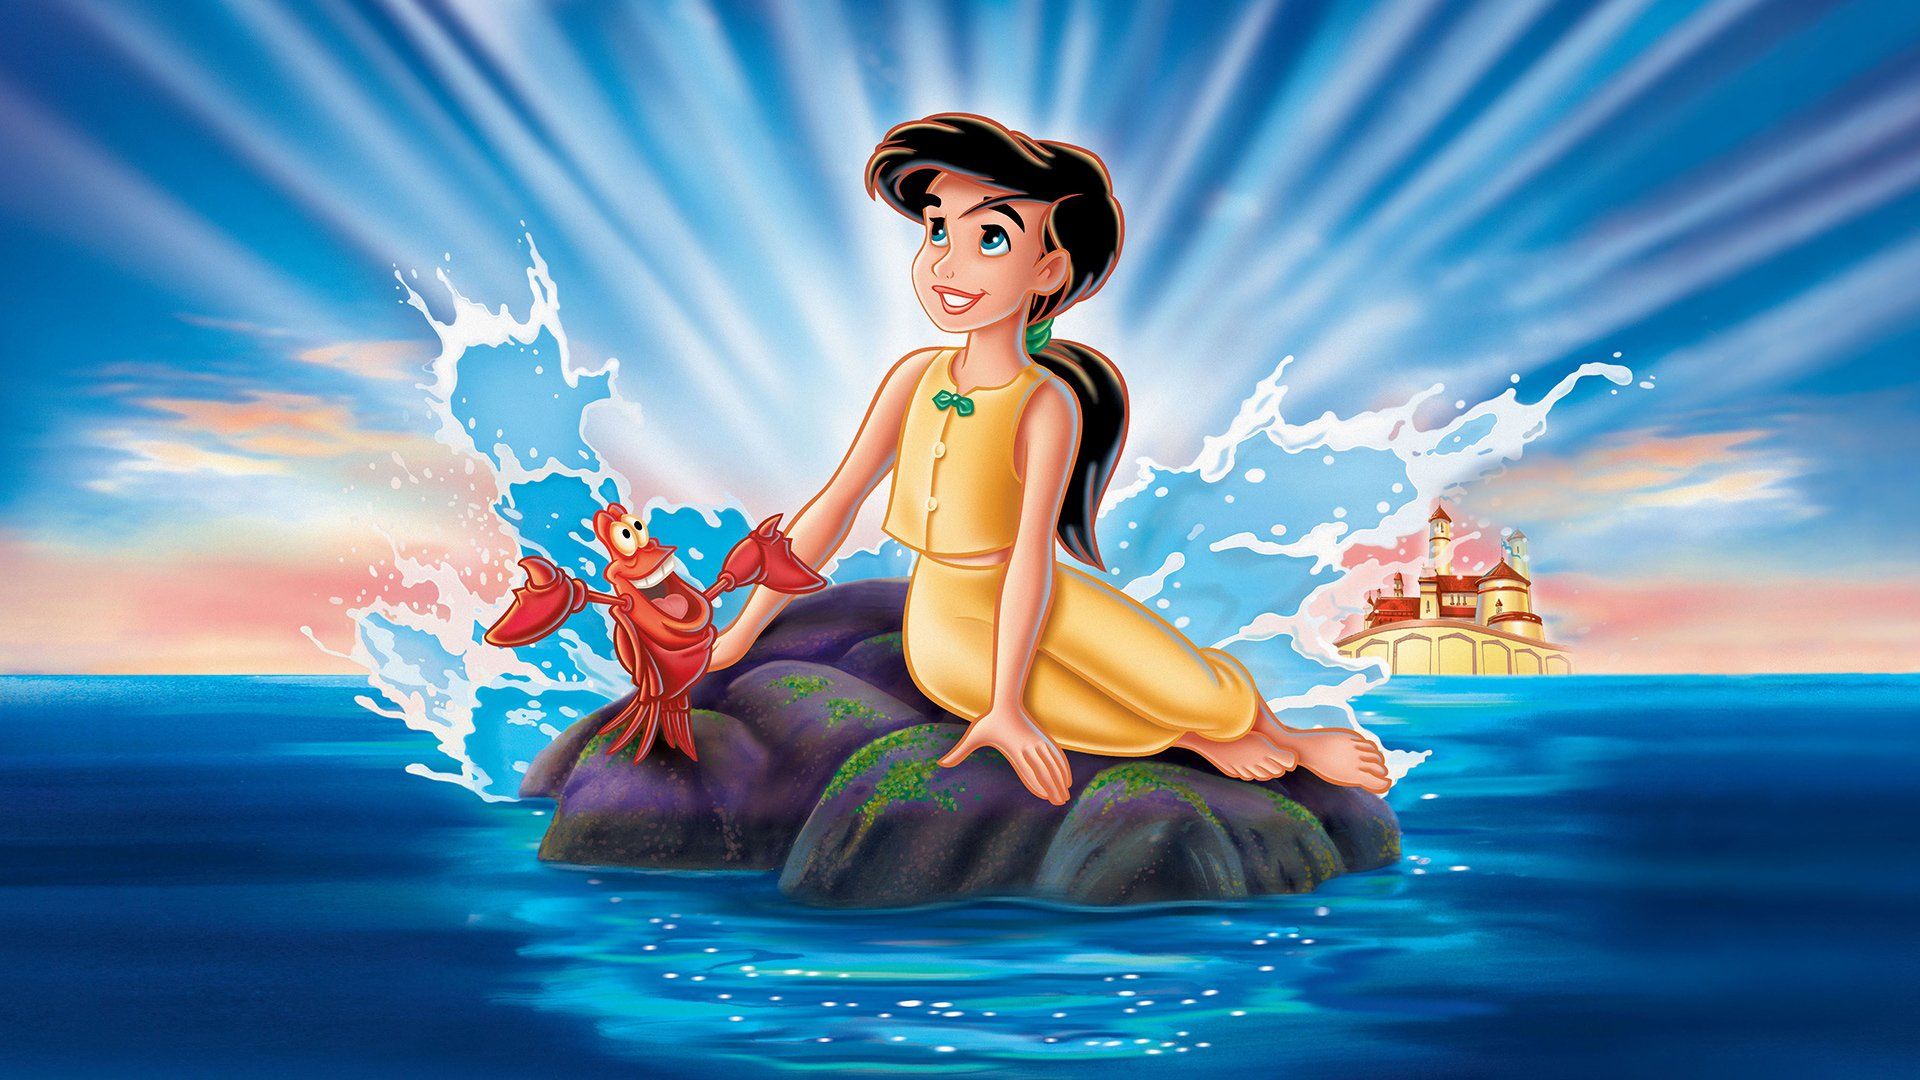 Melody On The Little Mermaid 2 Wallpapers Wallpaper Cave